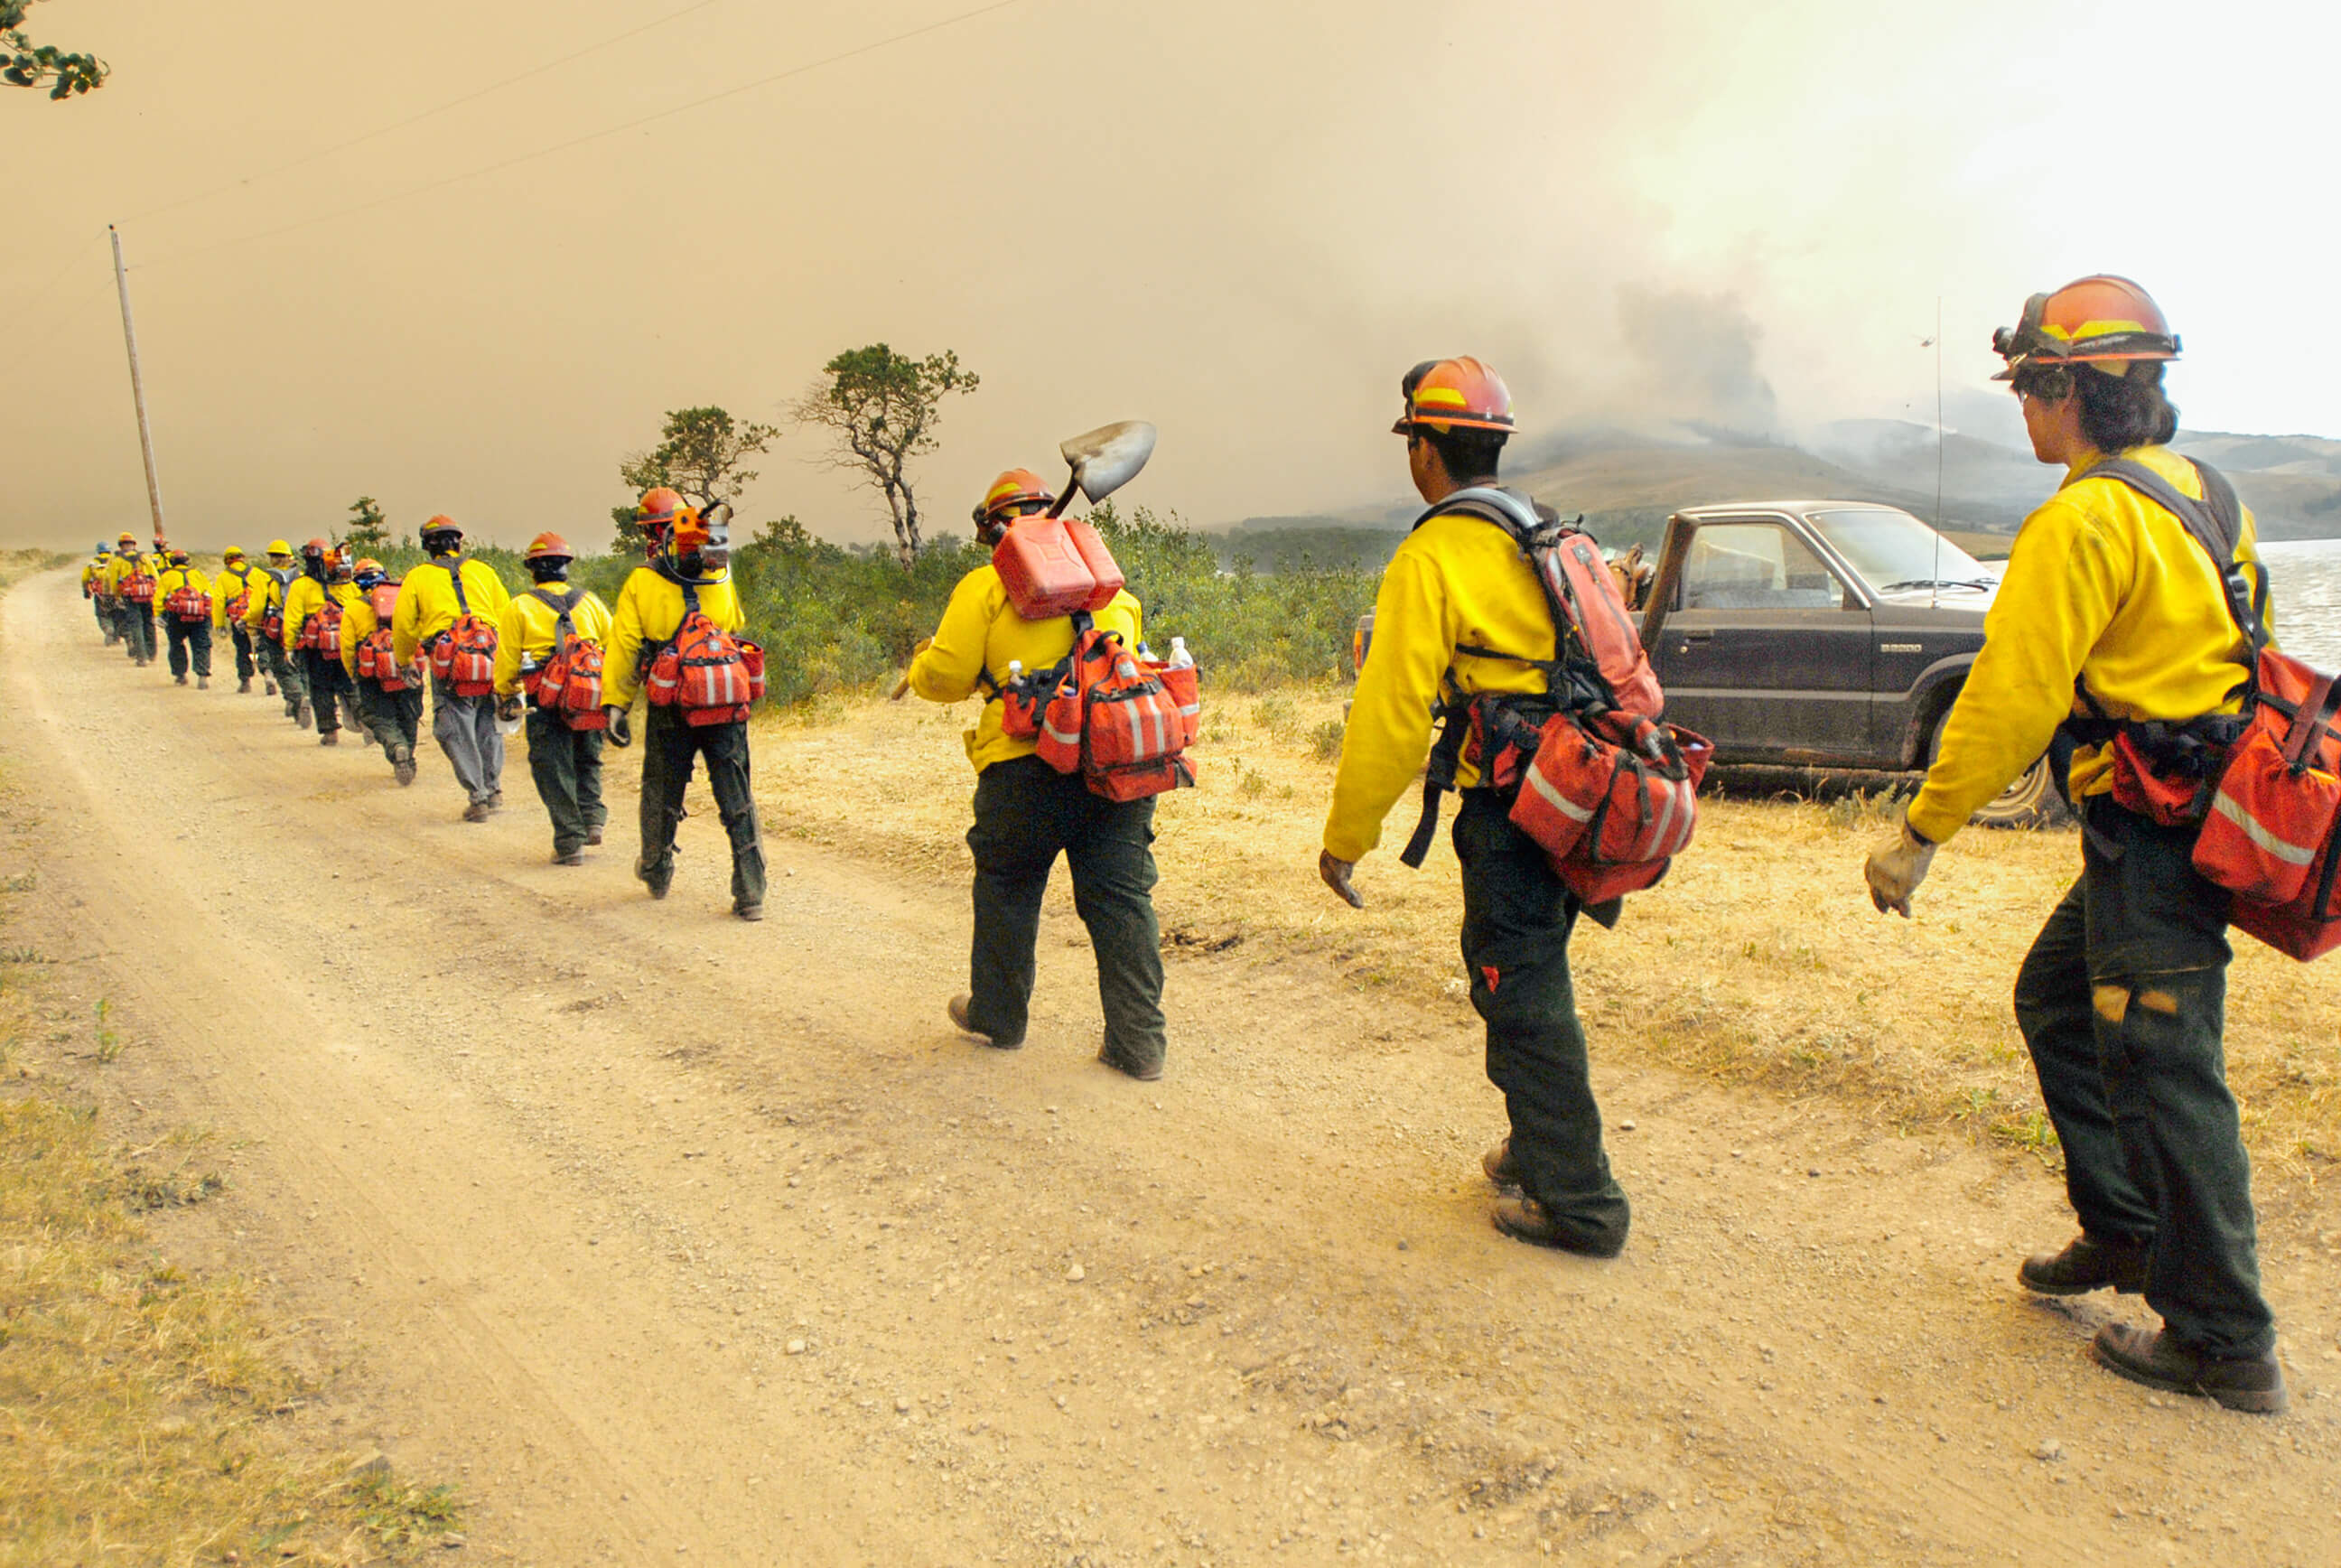 A line of firefighters head to work during a wildfire in Montana